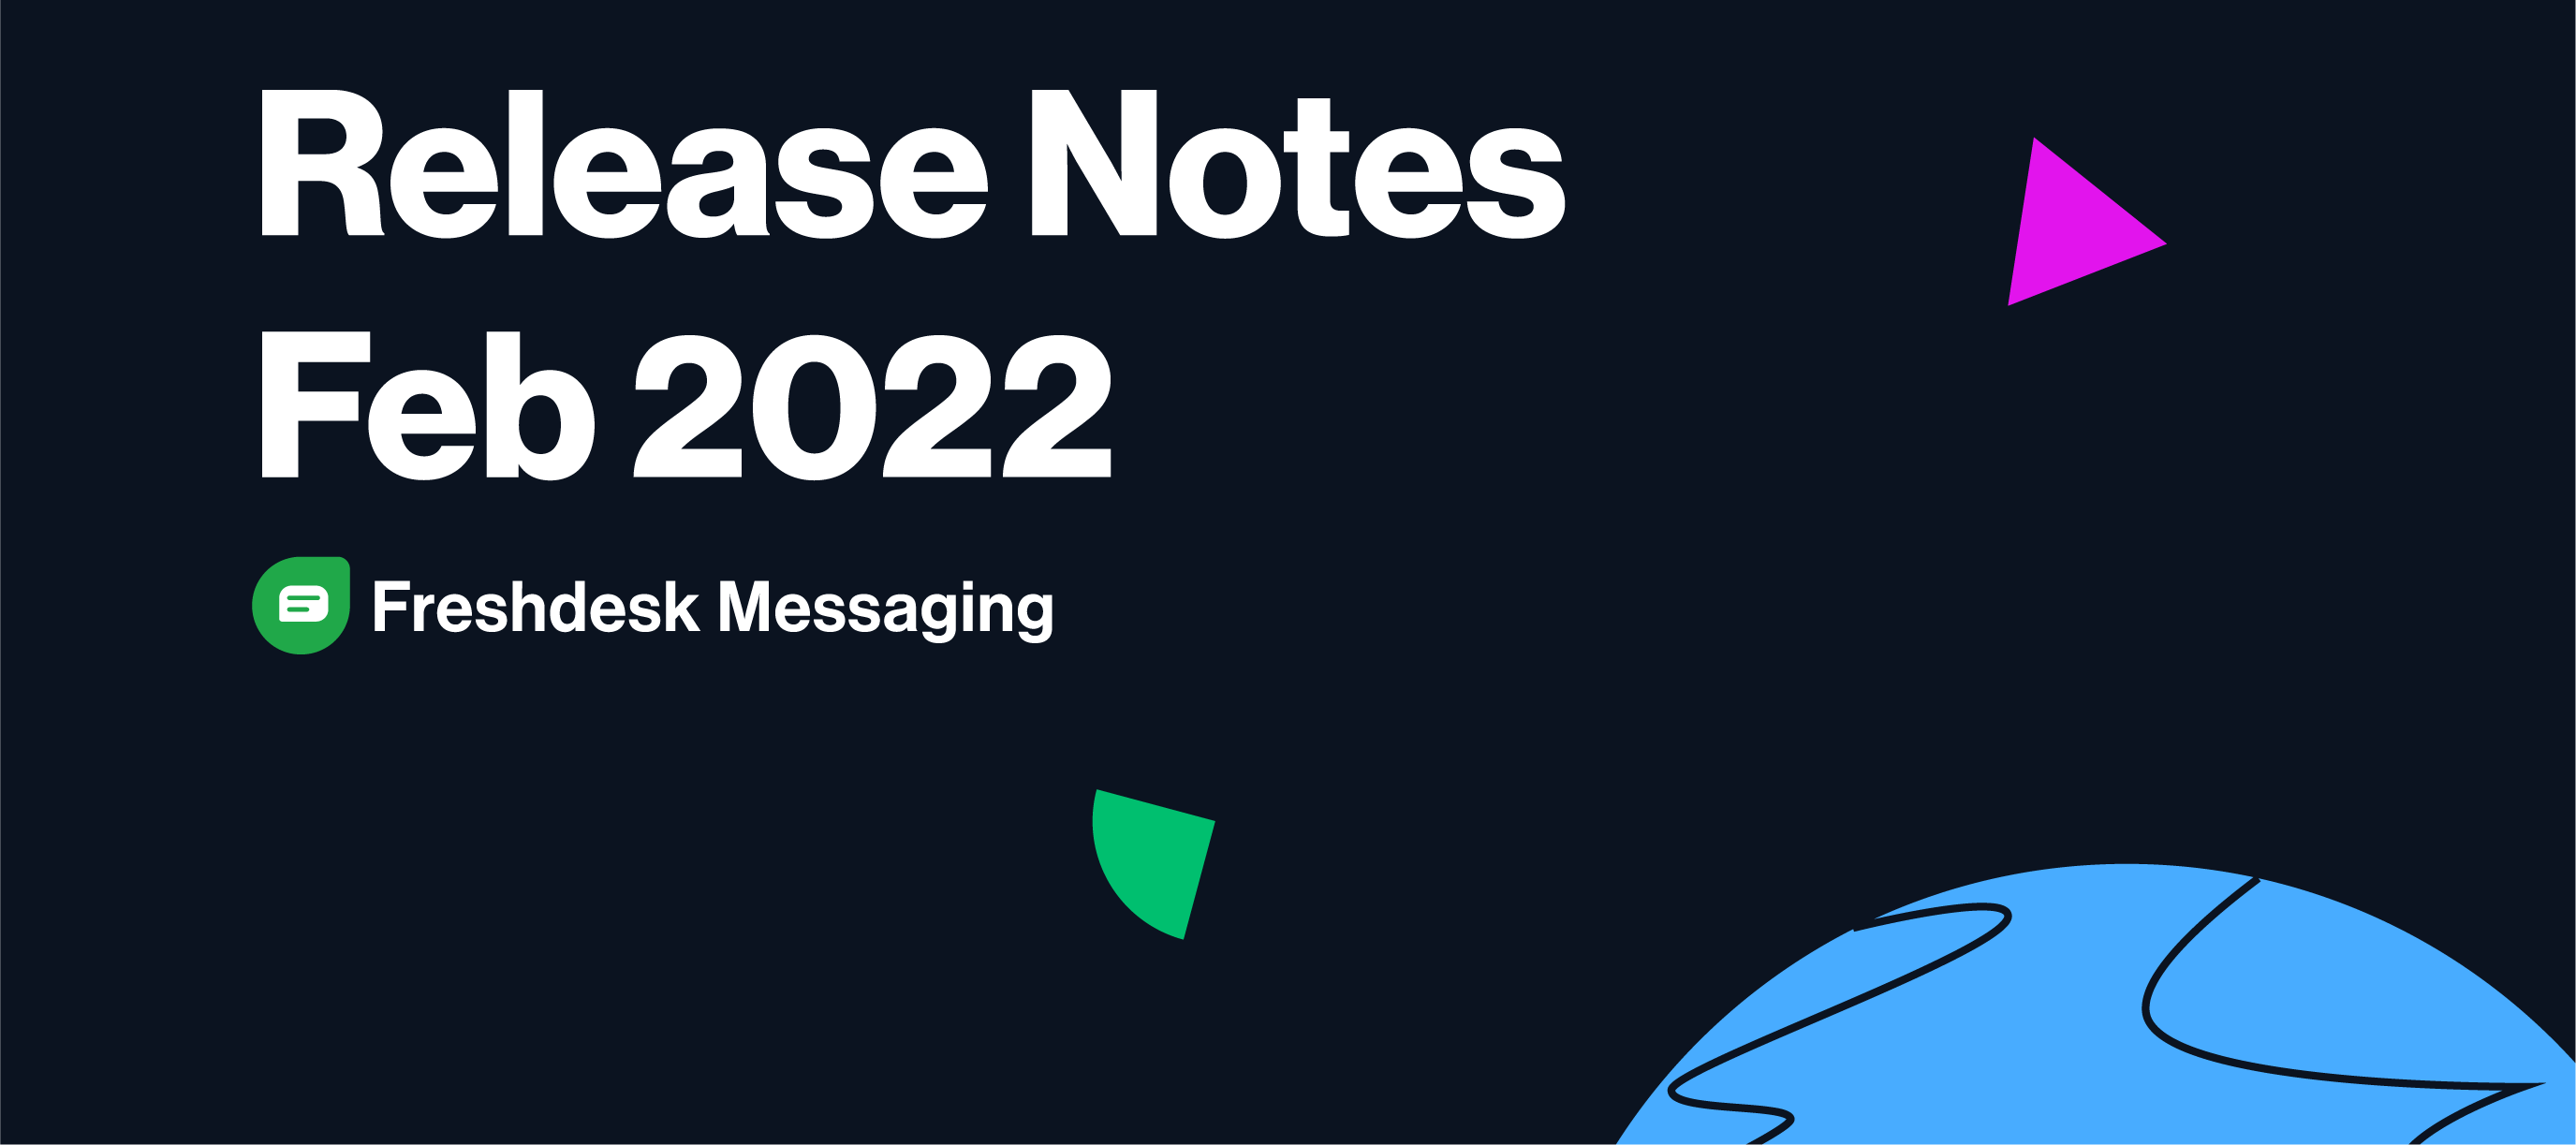 FRESHDESK MESSAGING RELEASE NOTES FROM FEB 1st to FEB 28th 2022